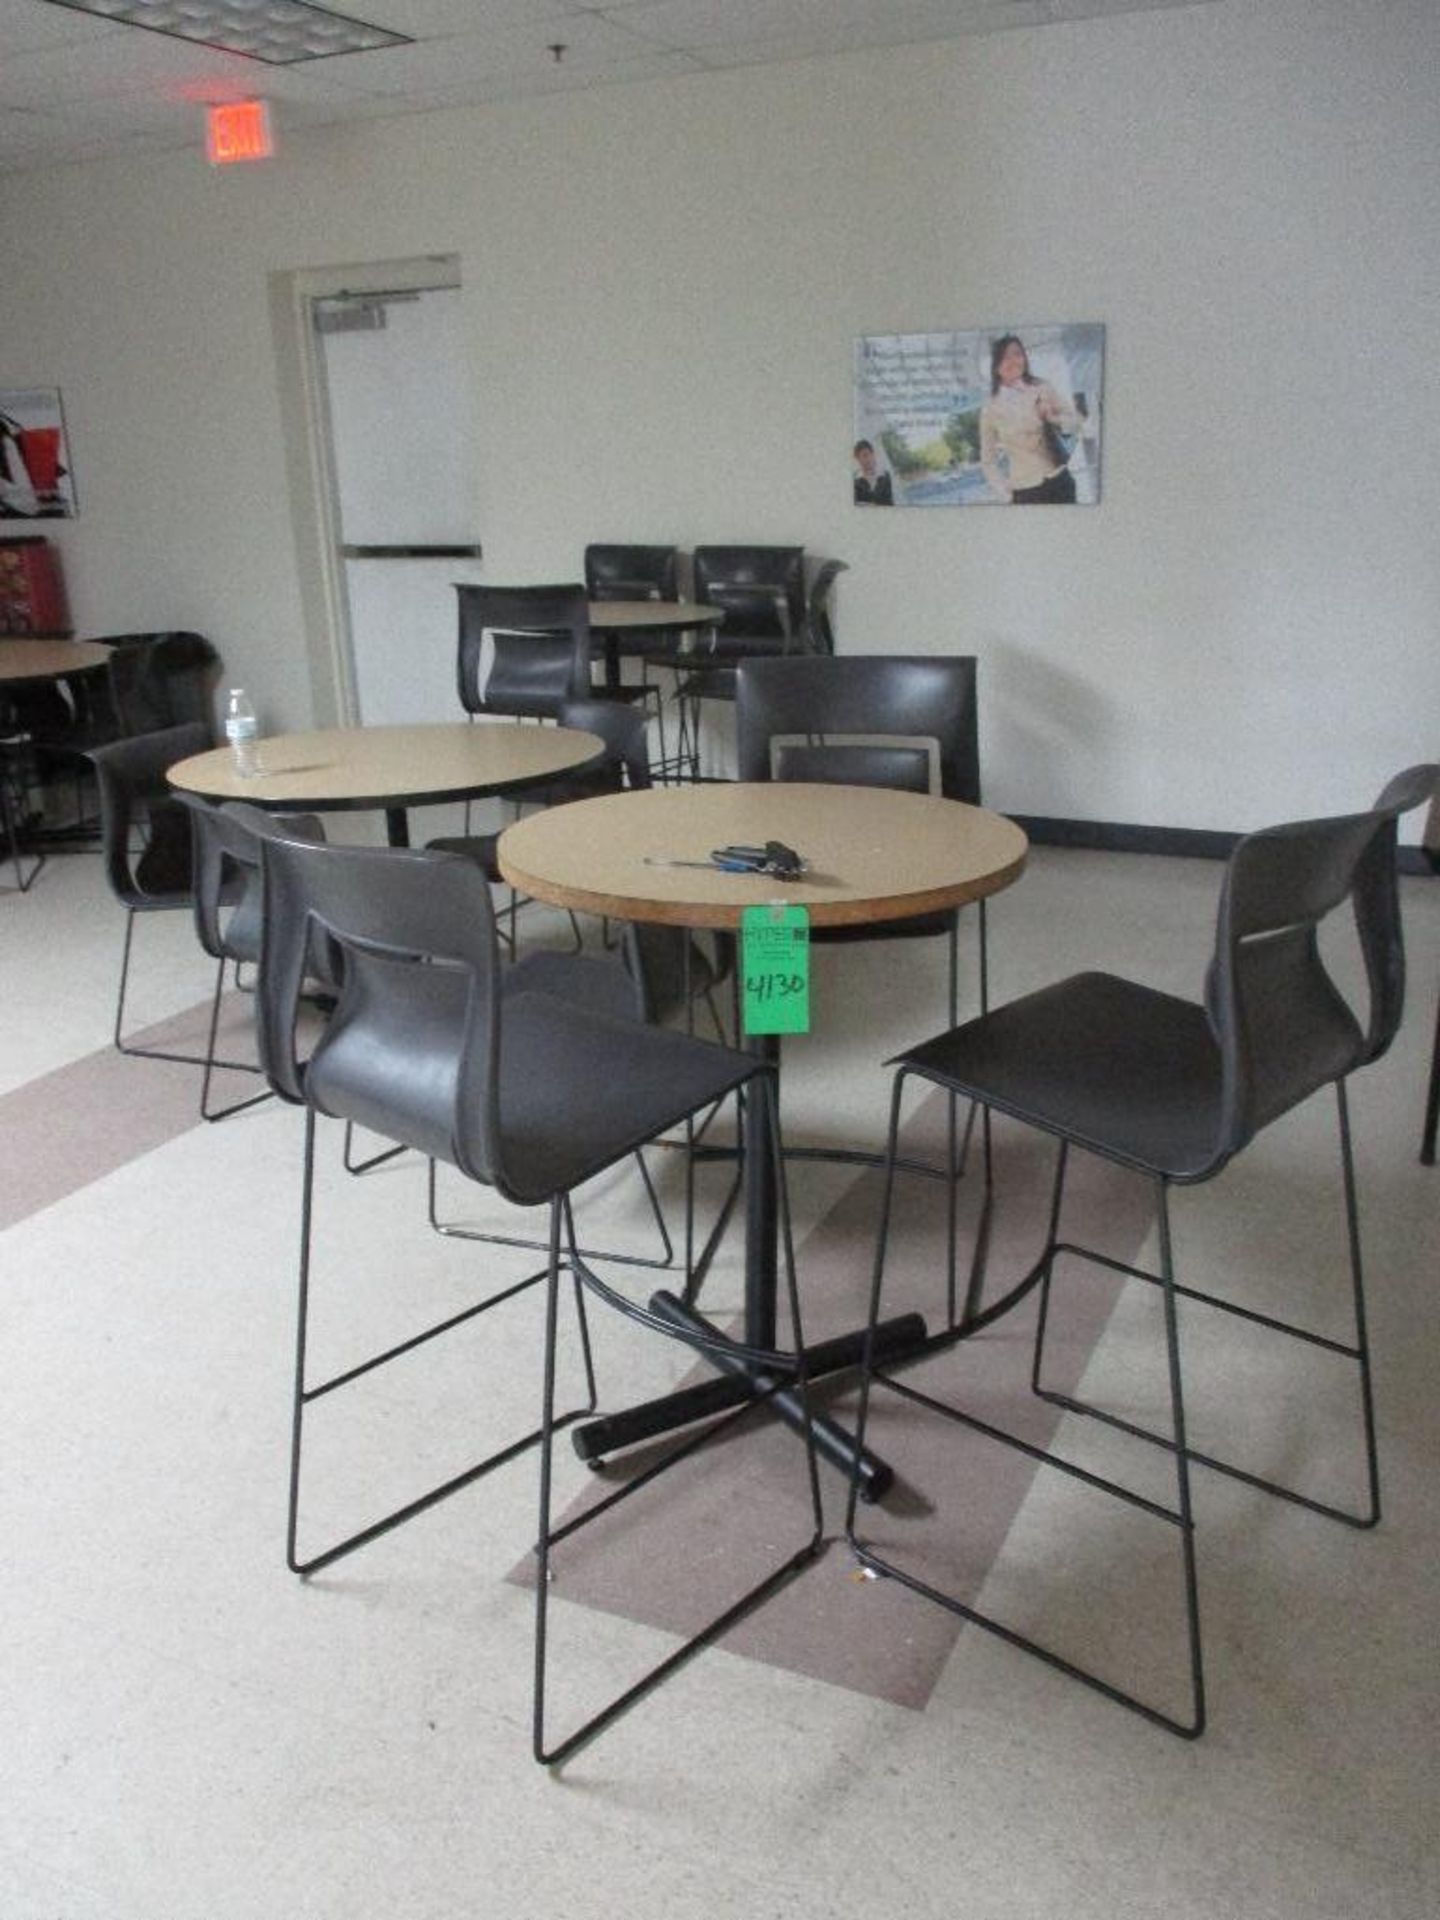 (snack area) 2 Tall round tables, 6 Tall chairs, 3 round tables 13 chairs and 2 tables